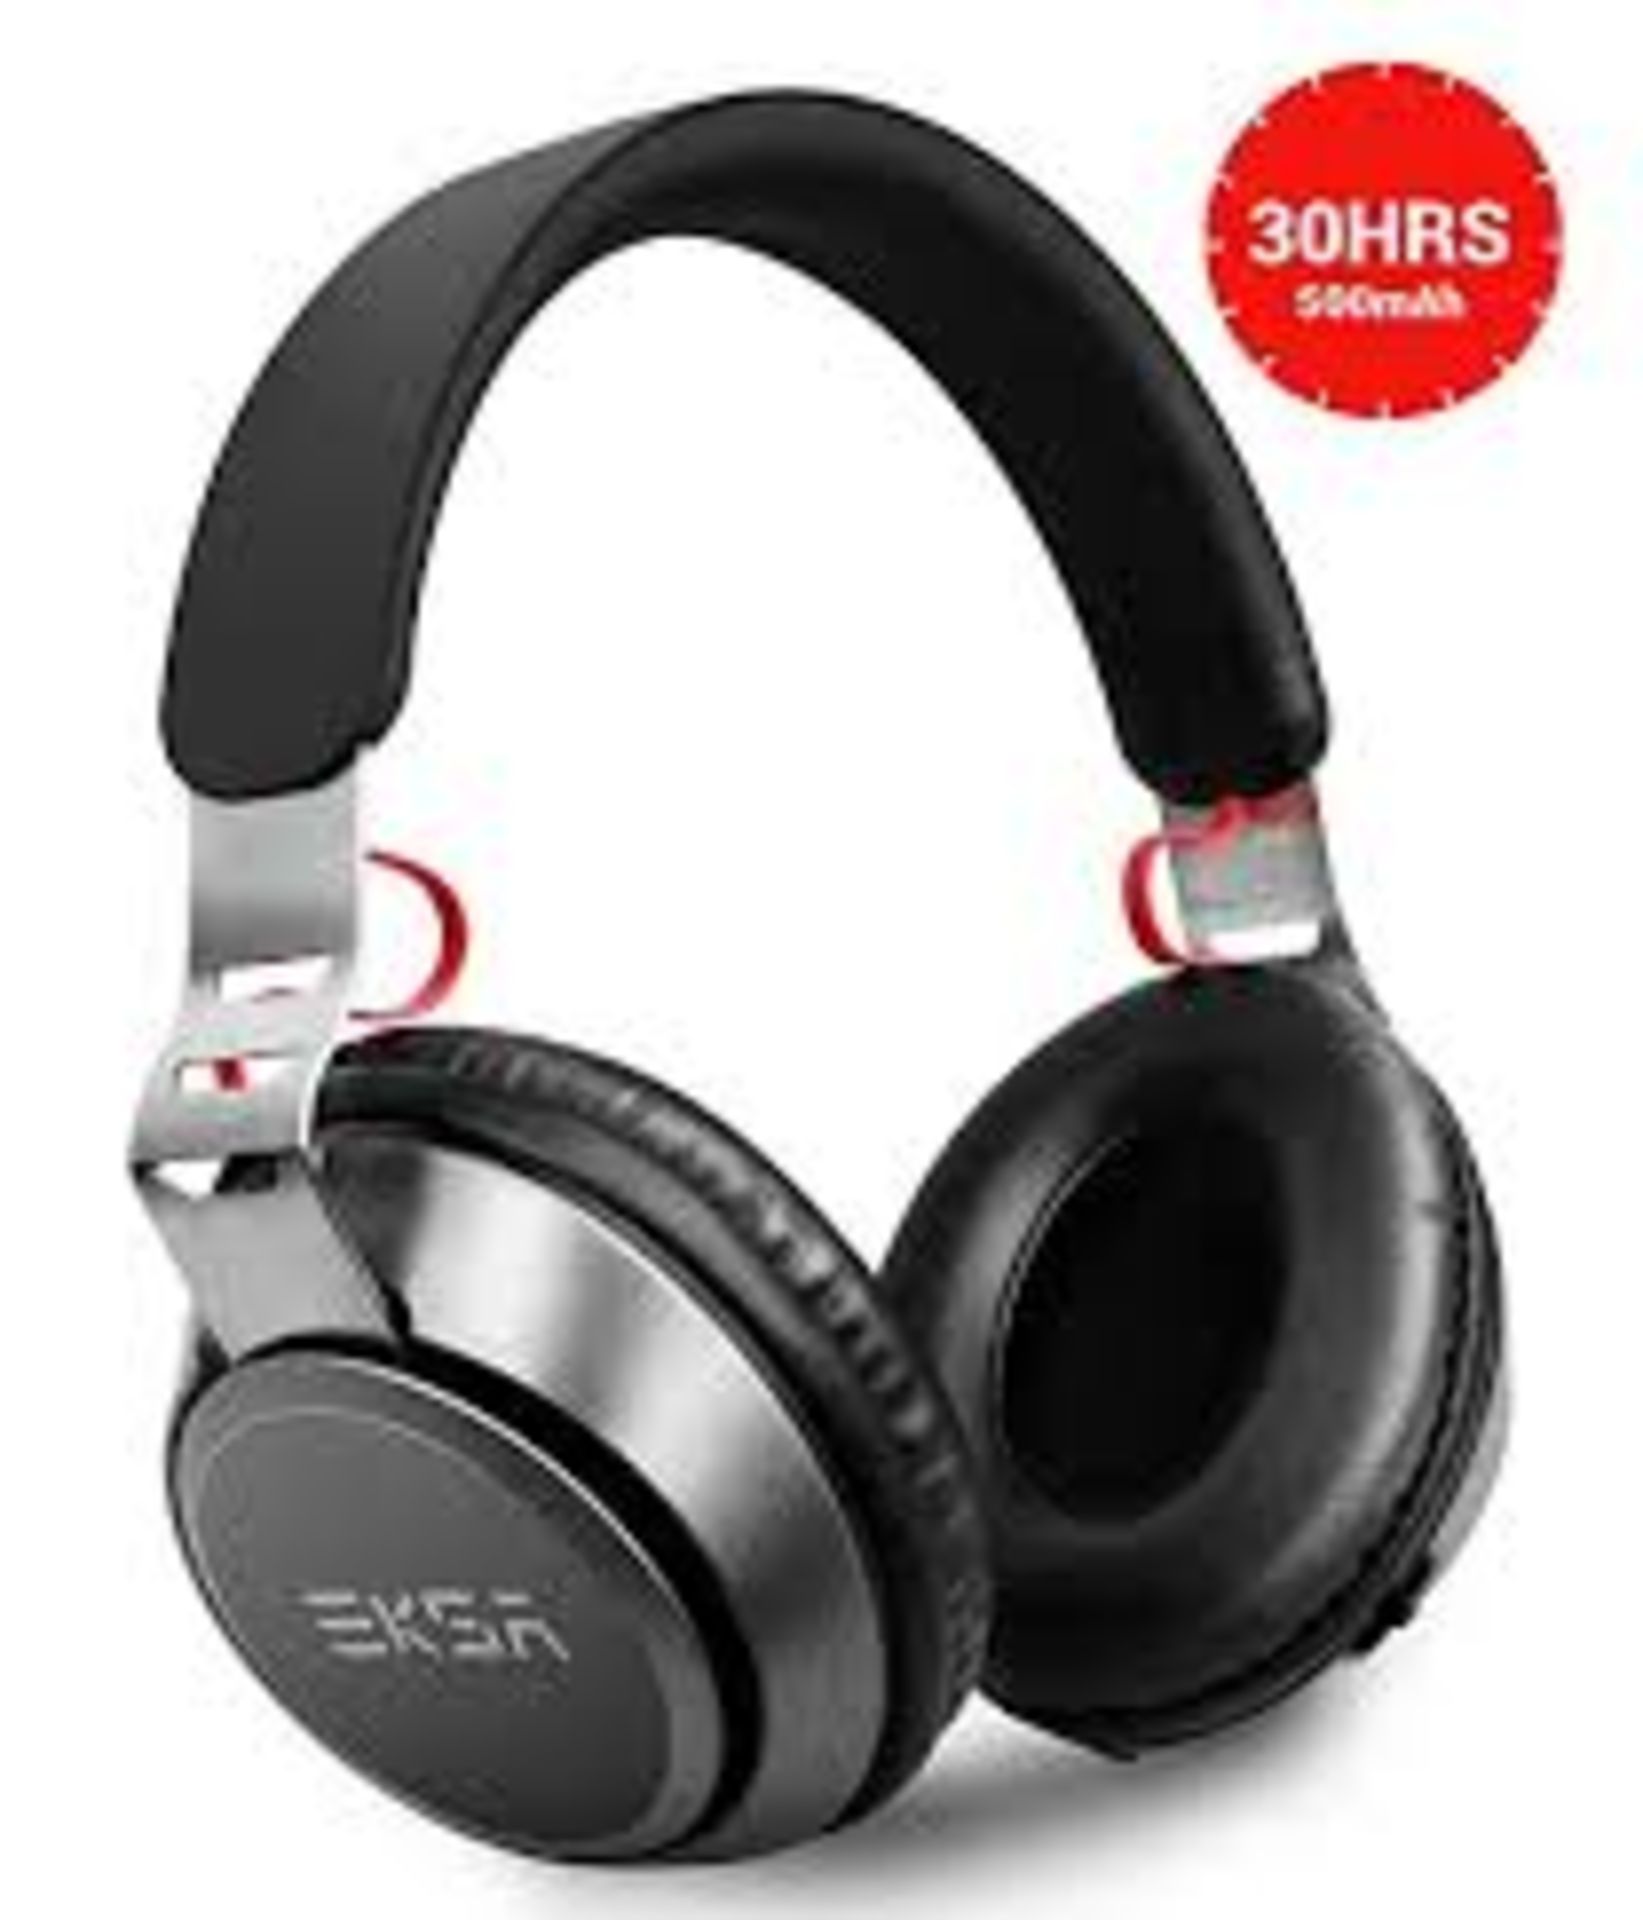 Lot To Contain 1 Boxed Brand New Pair Of EKSA-100 Wireless/Wire Headphones RRP £40